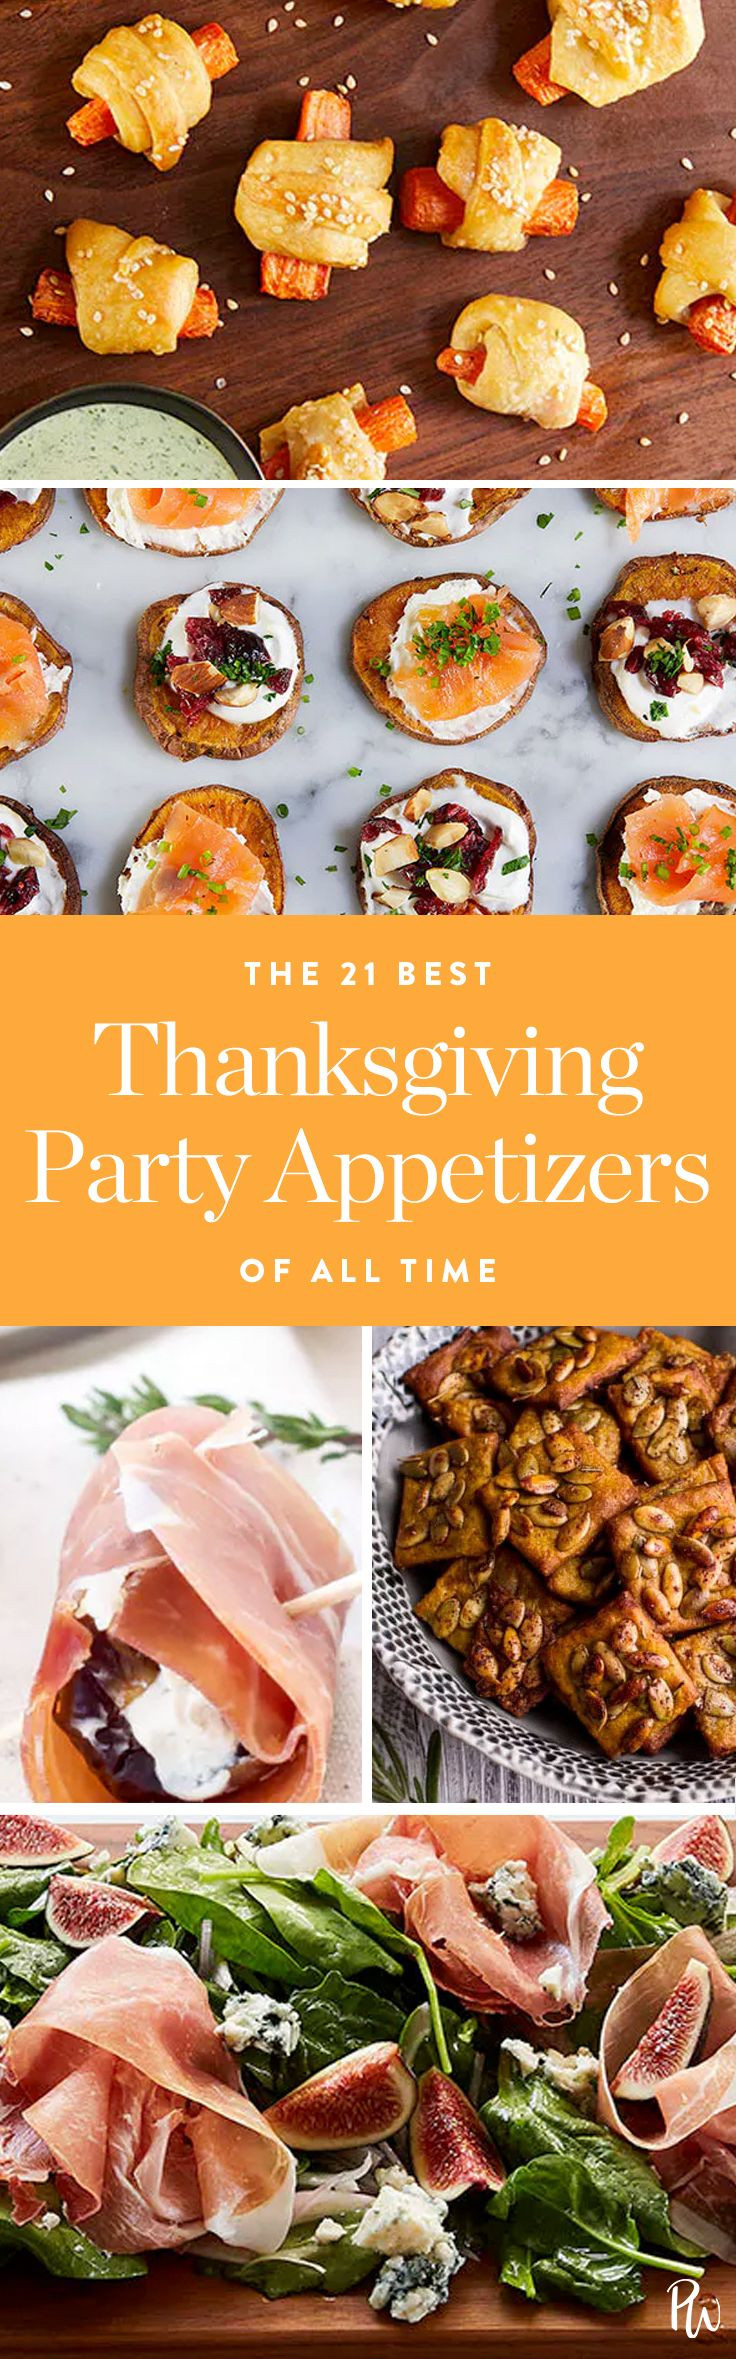 Best Appetizers For Thanksgiving
 Best 25 Thanksgiving appetizers ideas on Pinterest